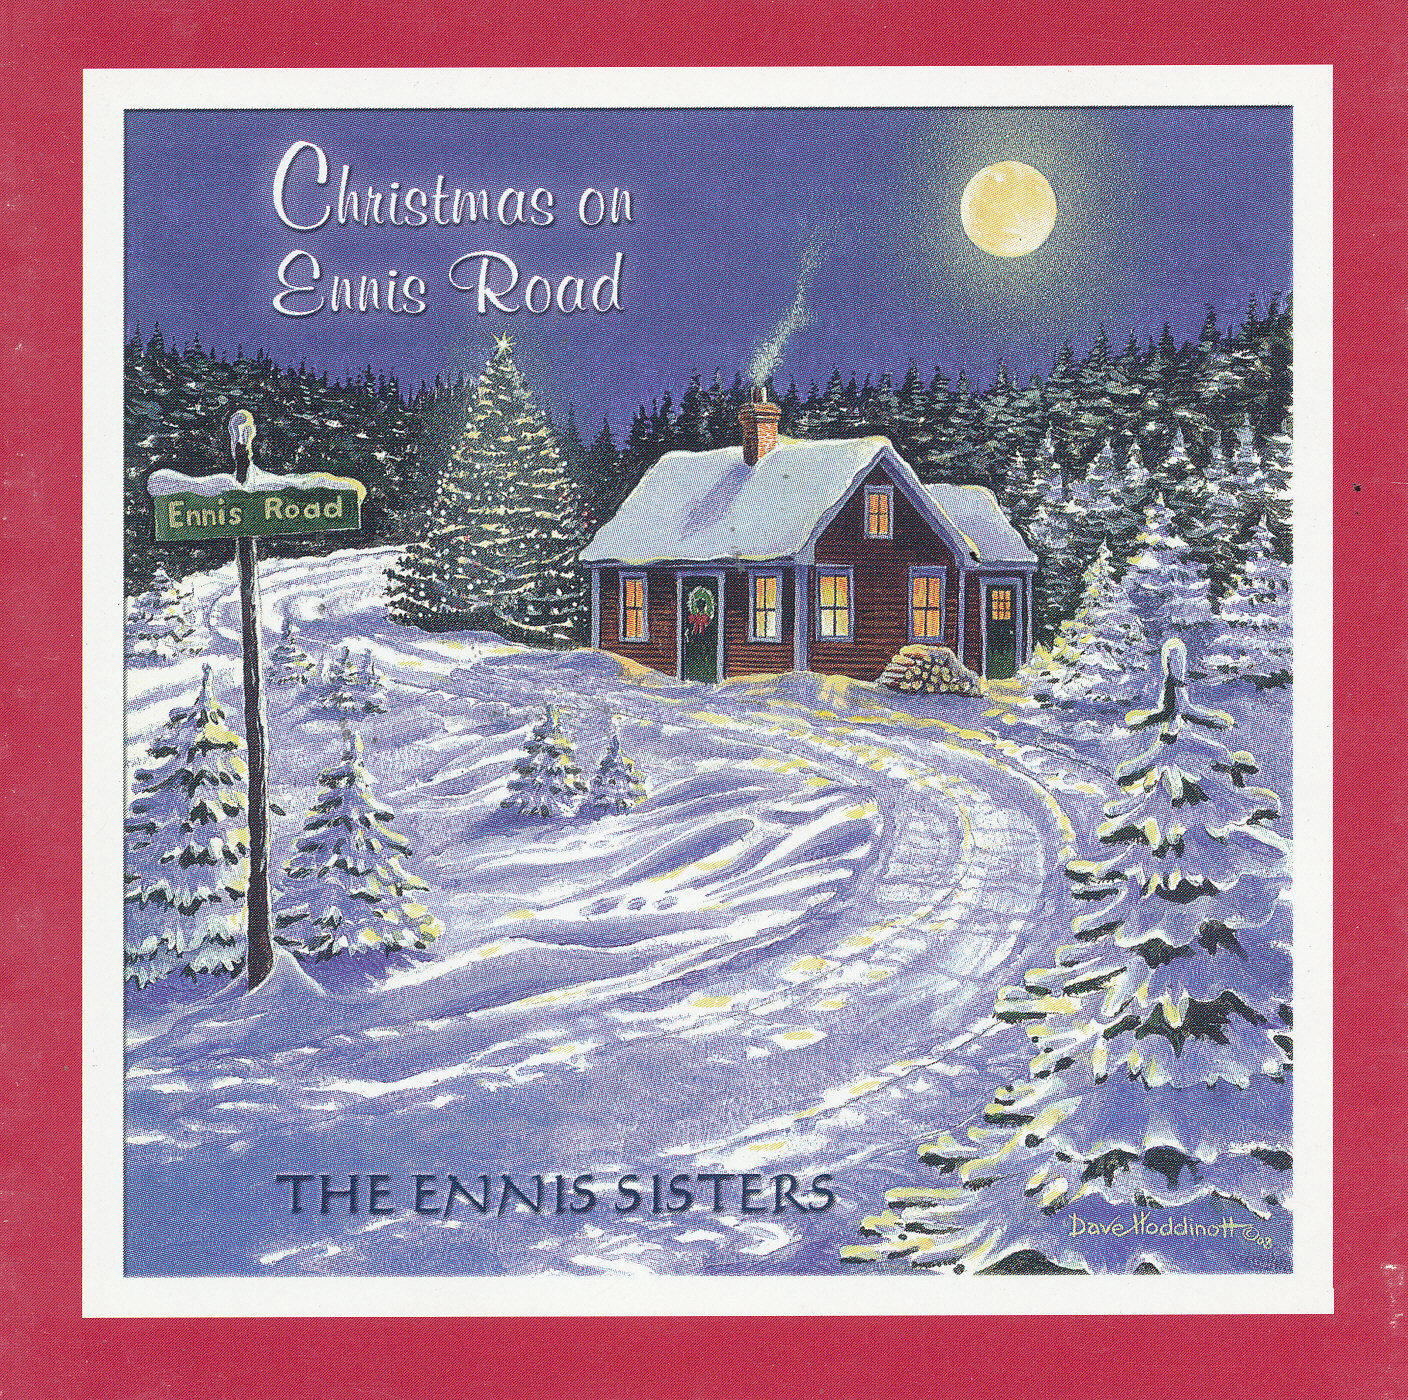 Freds Records » Blog Archive Ennis Sisters - Christmas On Ennis Road - Freds Records